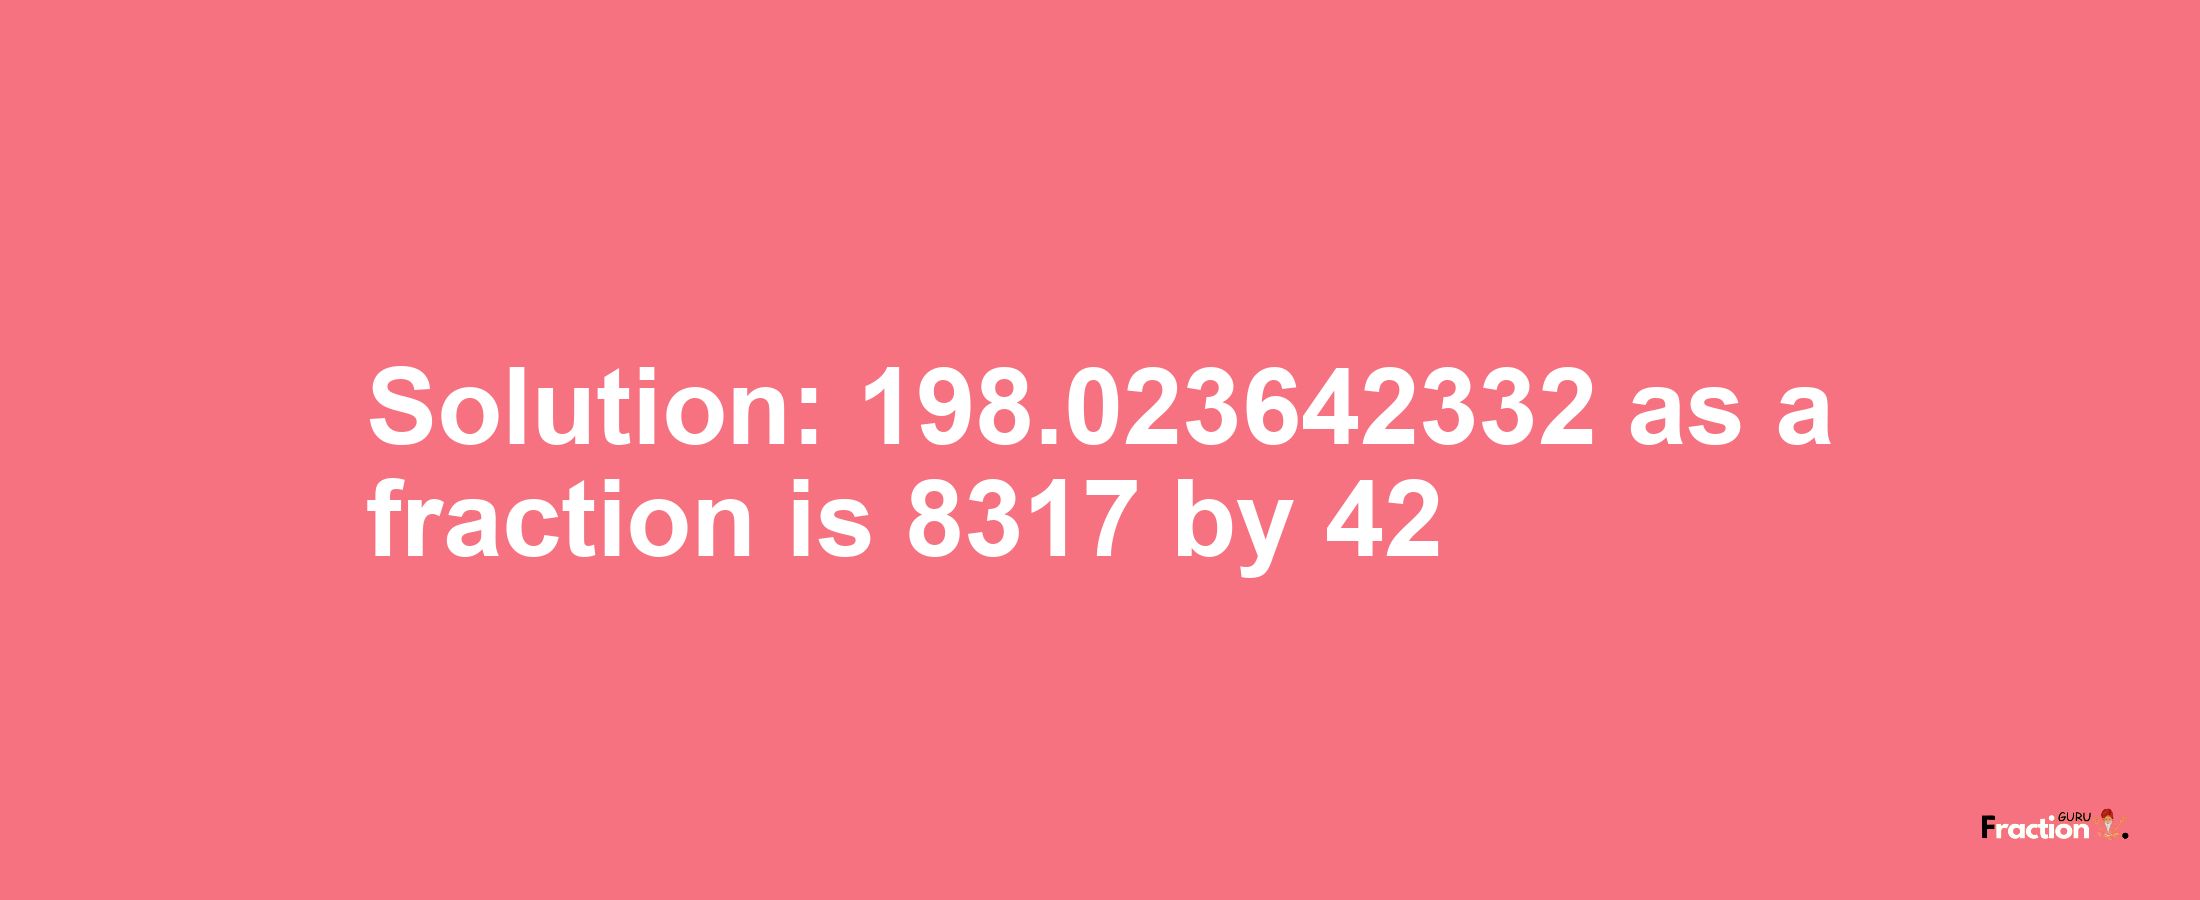 Solution:198.023642332 as a fraction is 8317/42